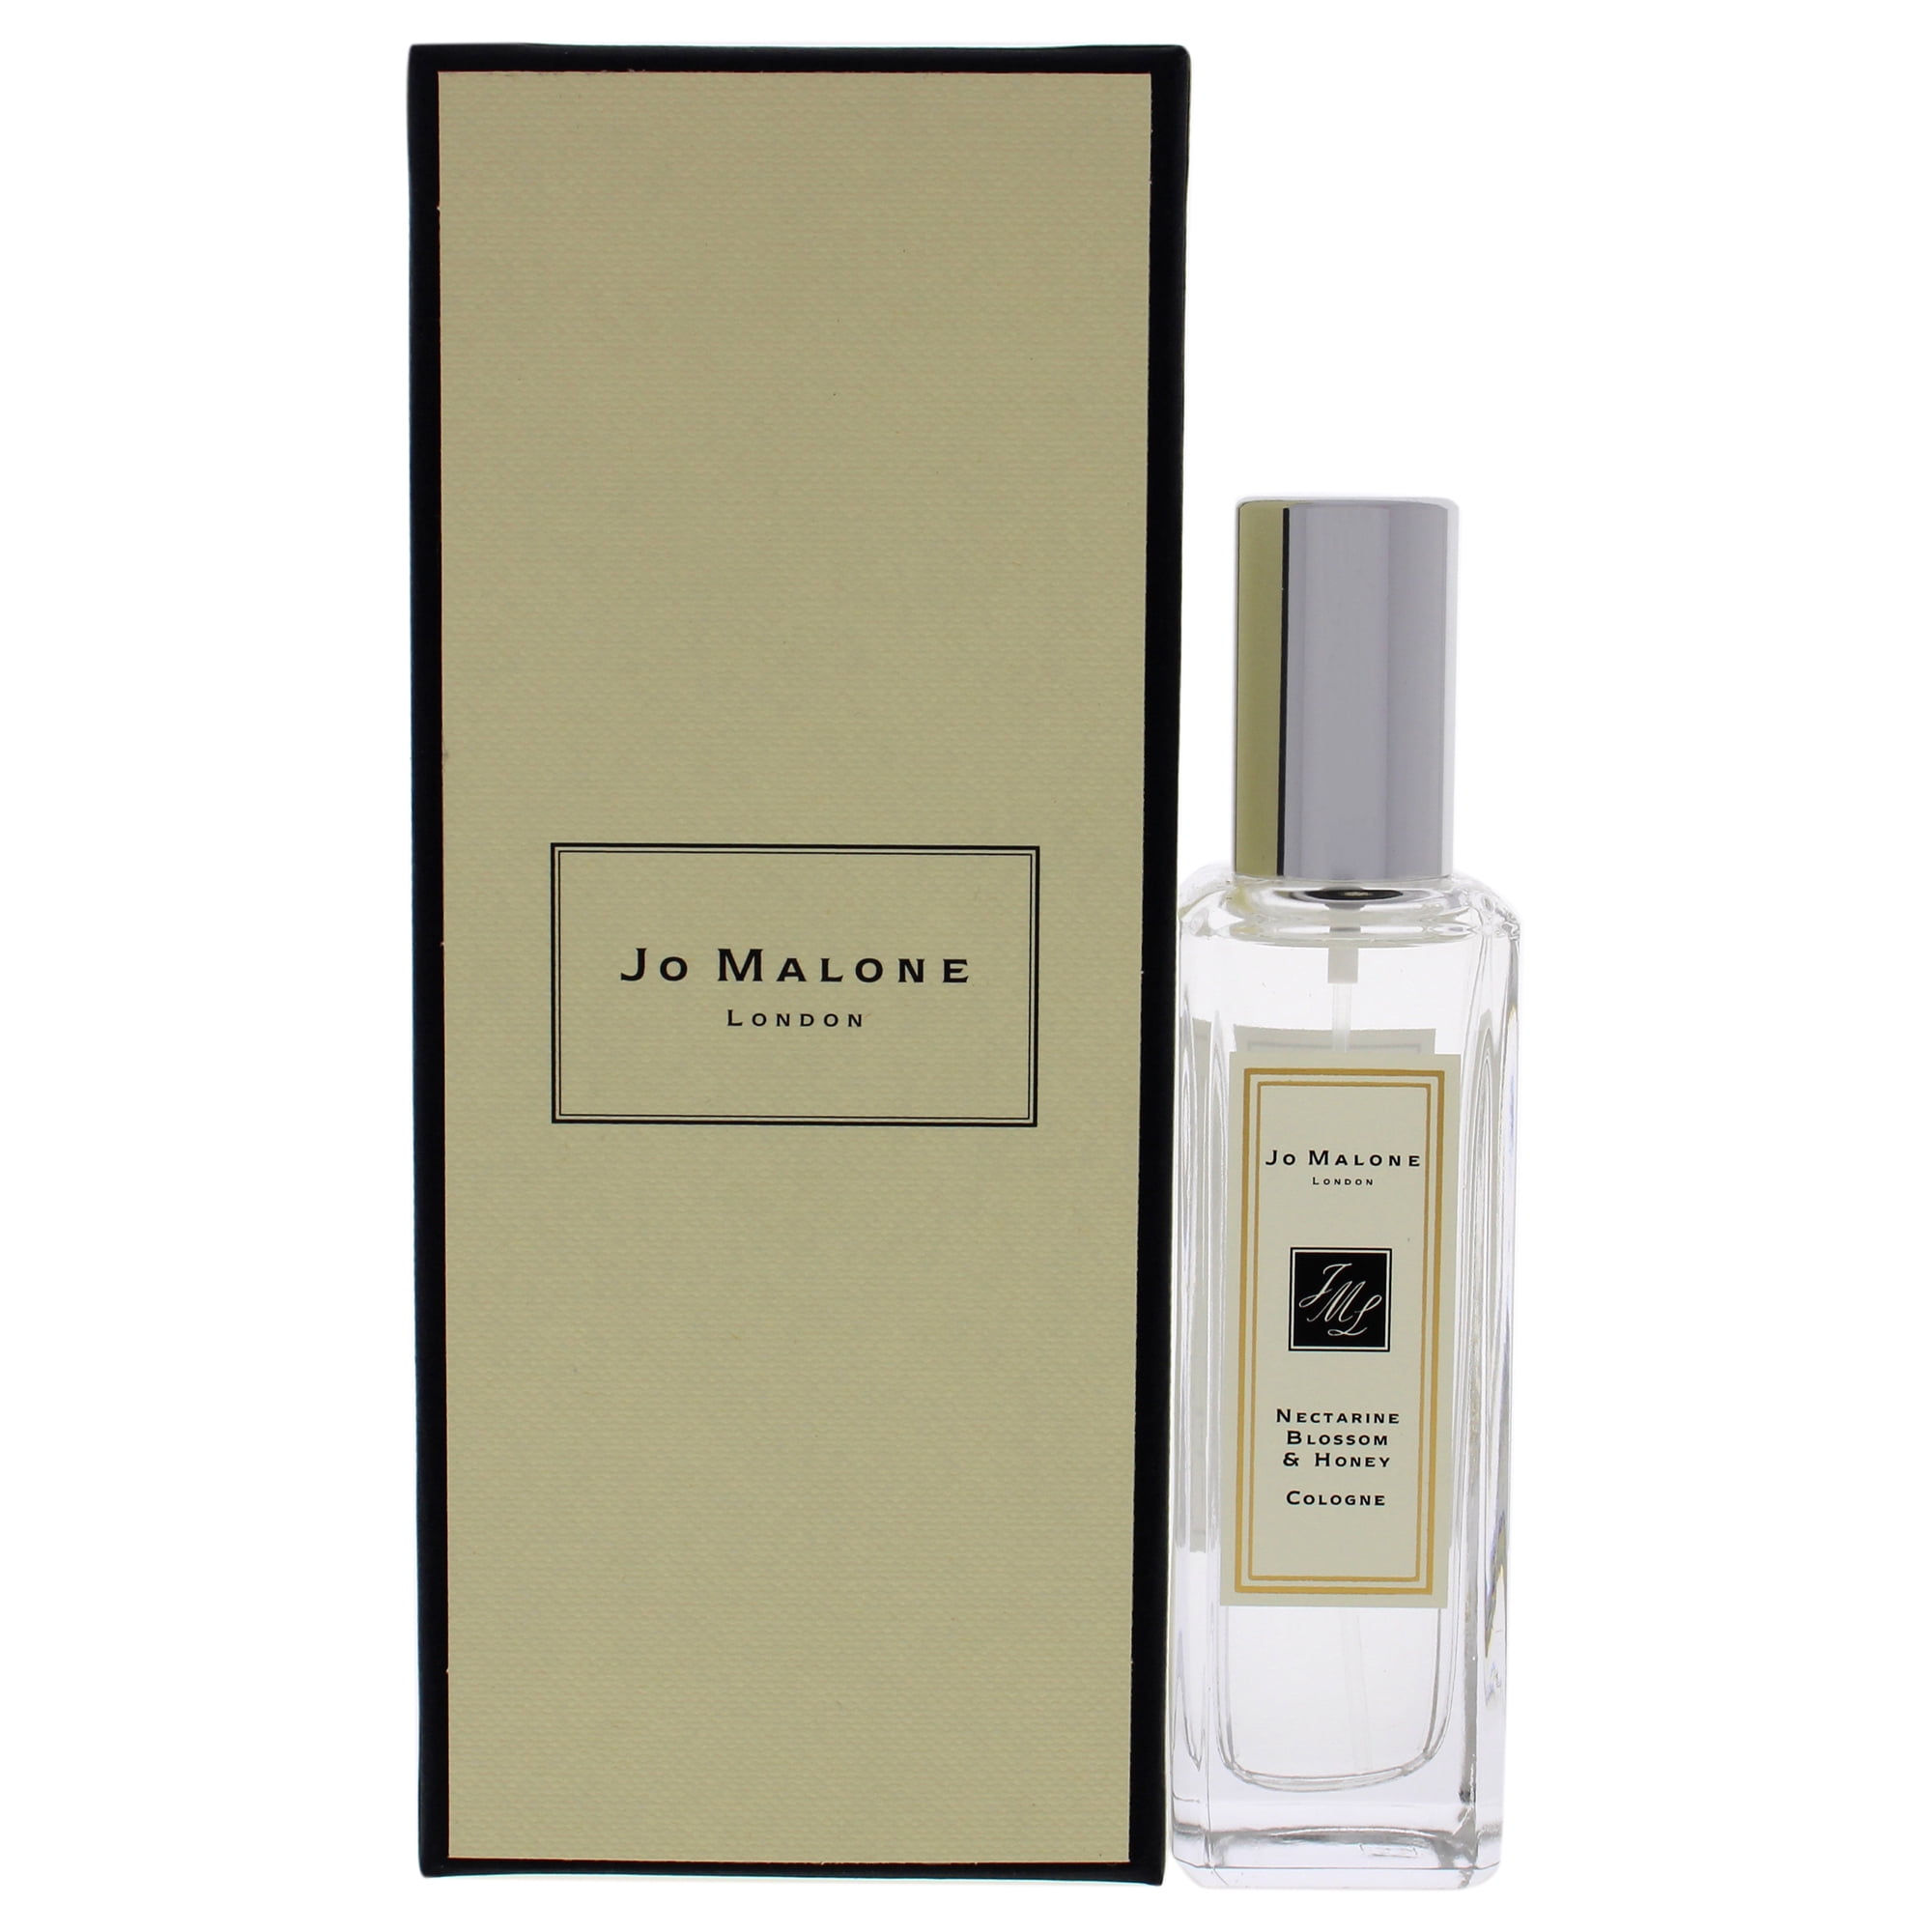 Nectarine Blossom and Honey by Jo Malone for Women - 1 oz Cologne Spray